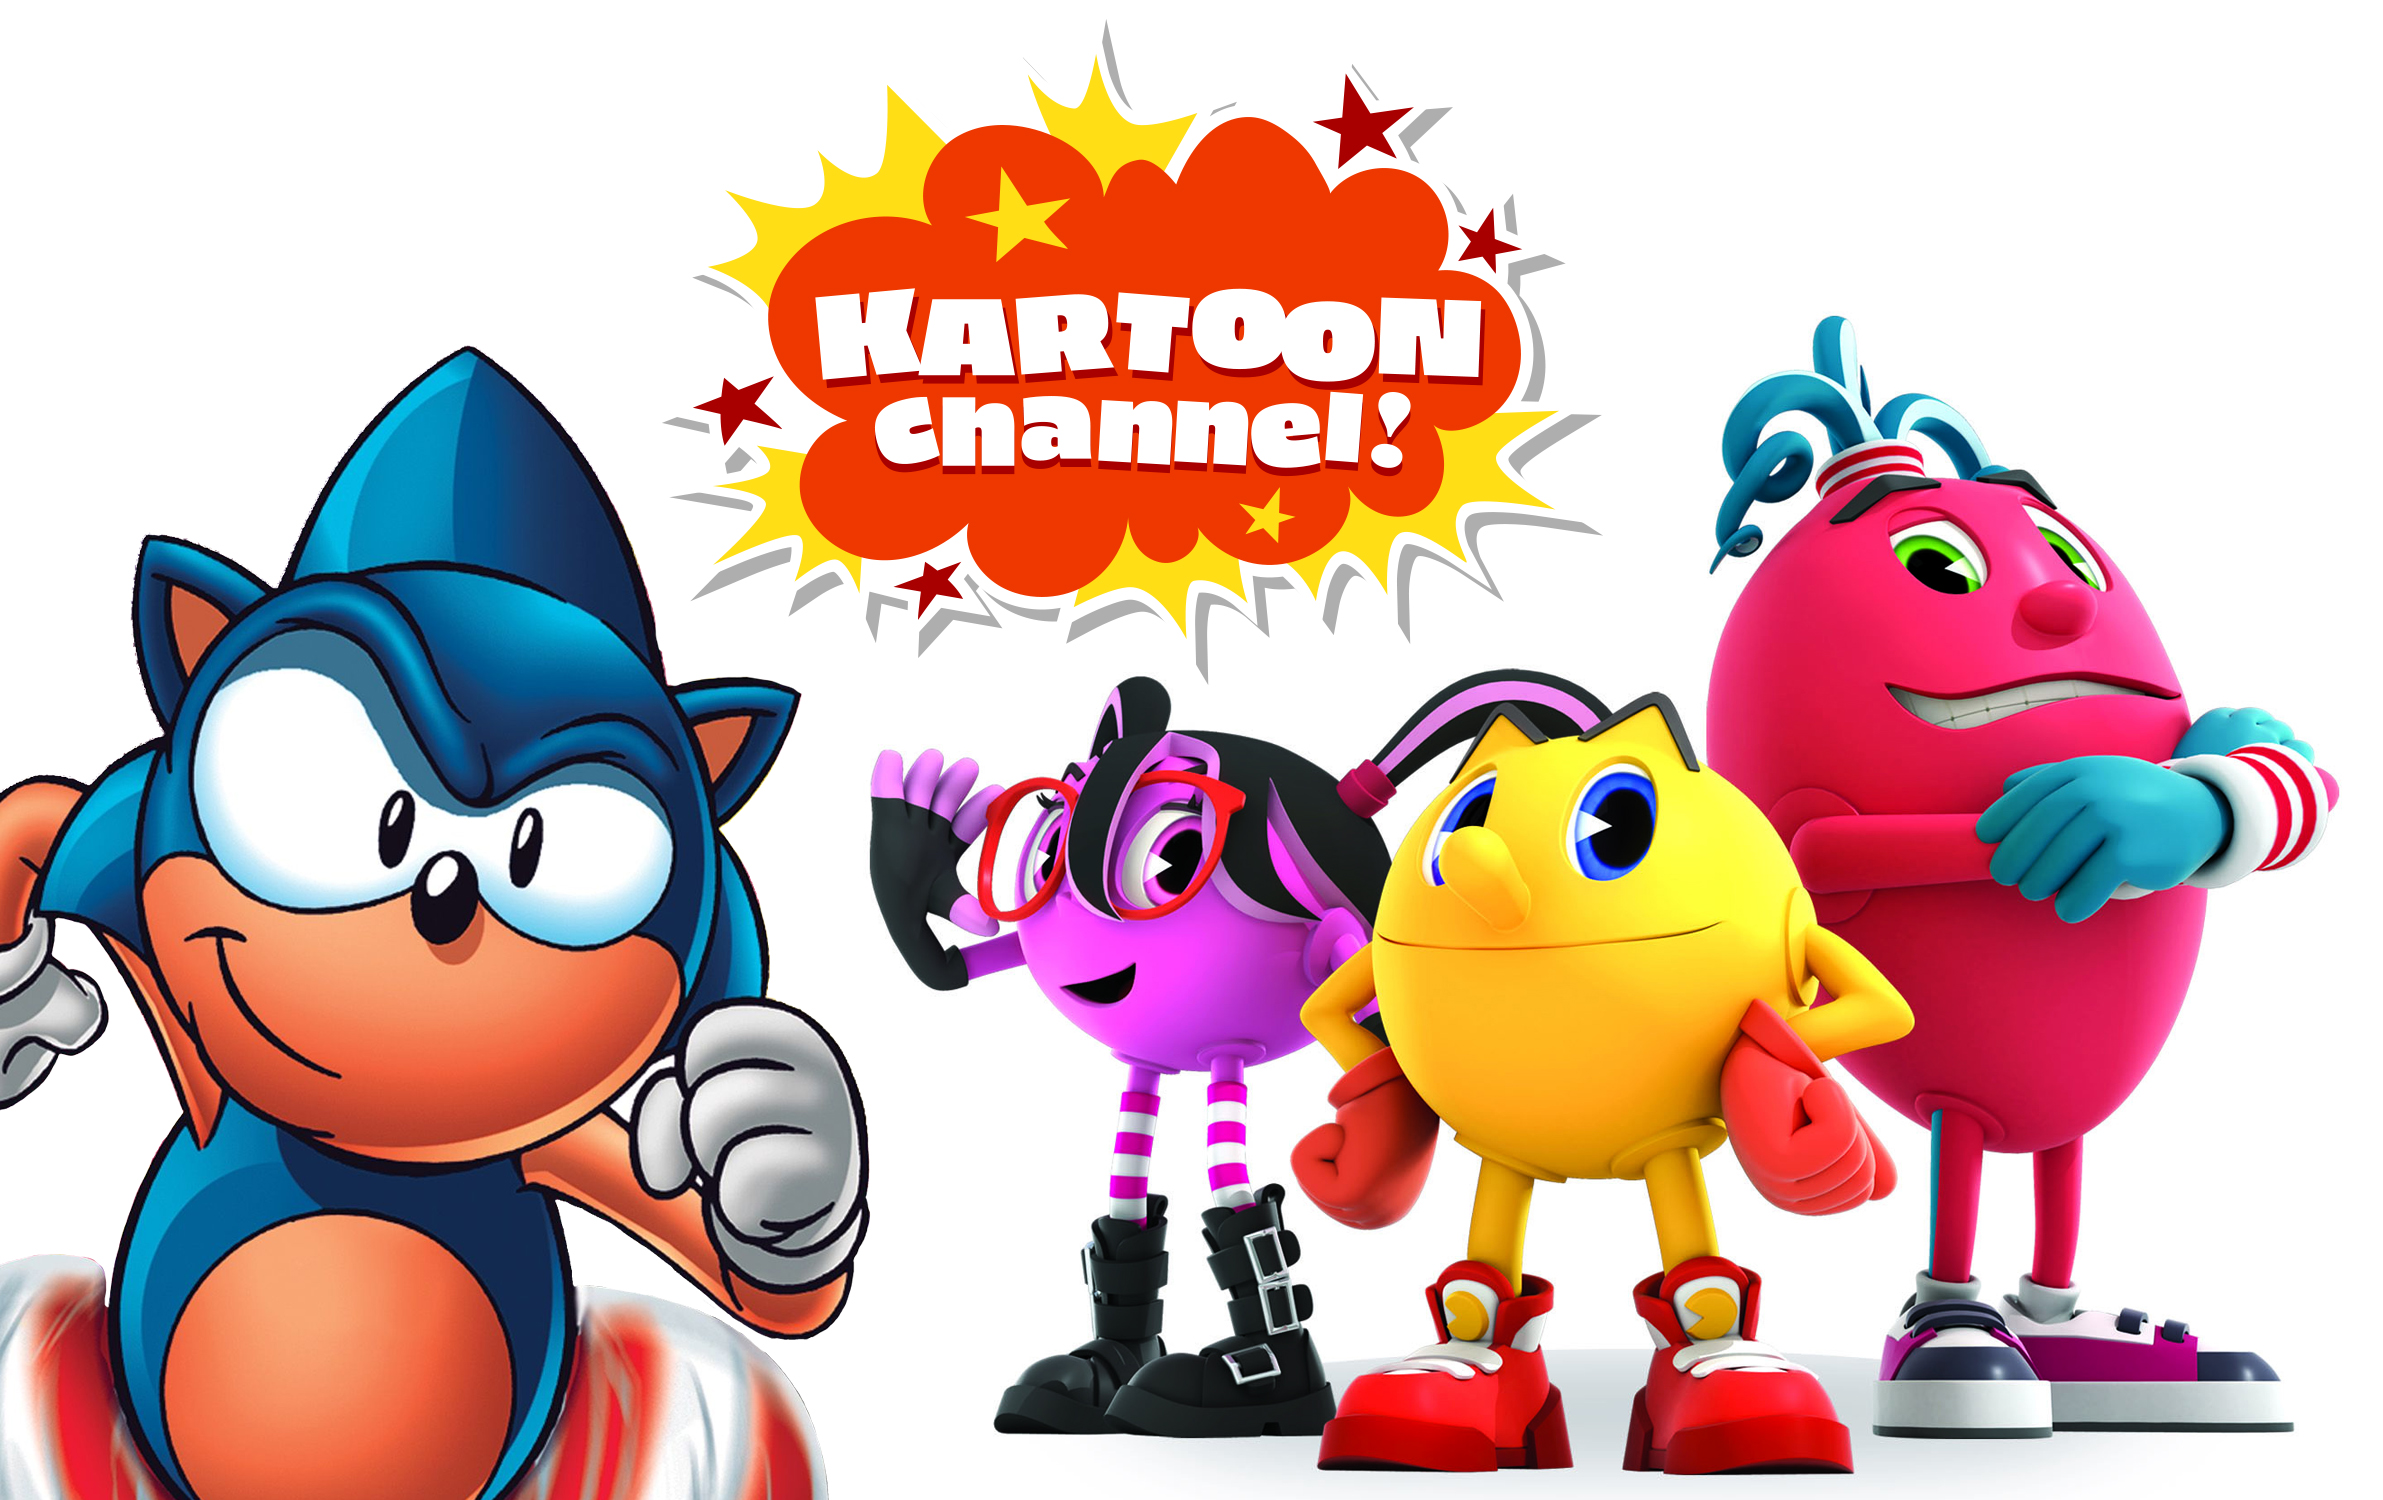 Kartoon Channel! Acquires “Sonic The Hedgehog” and